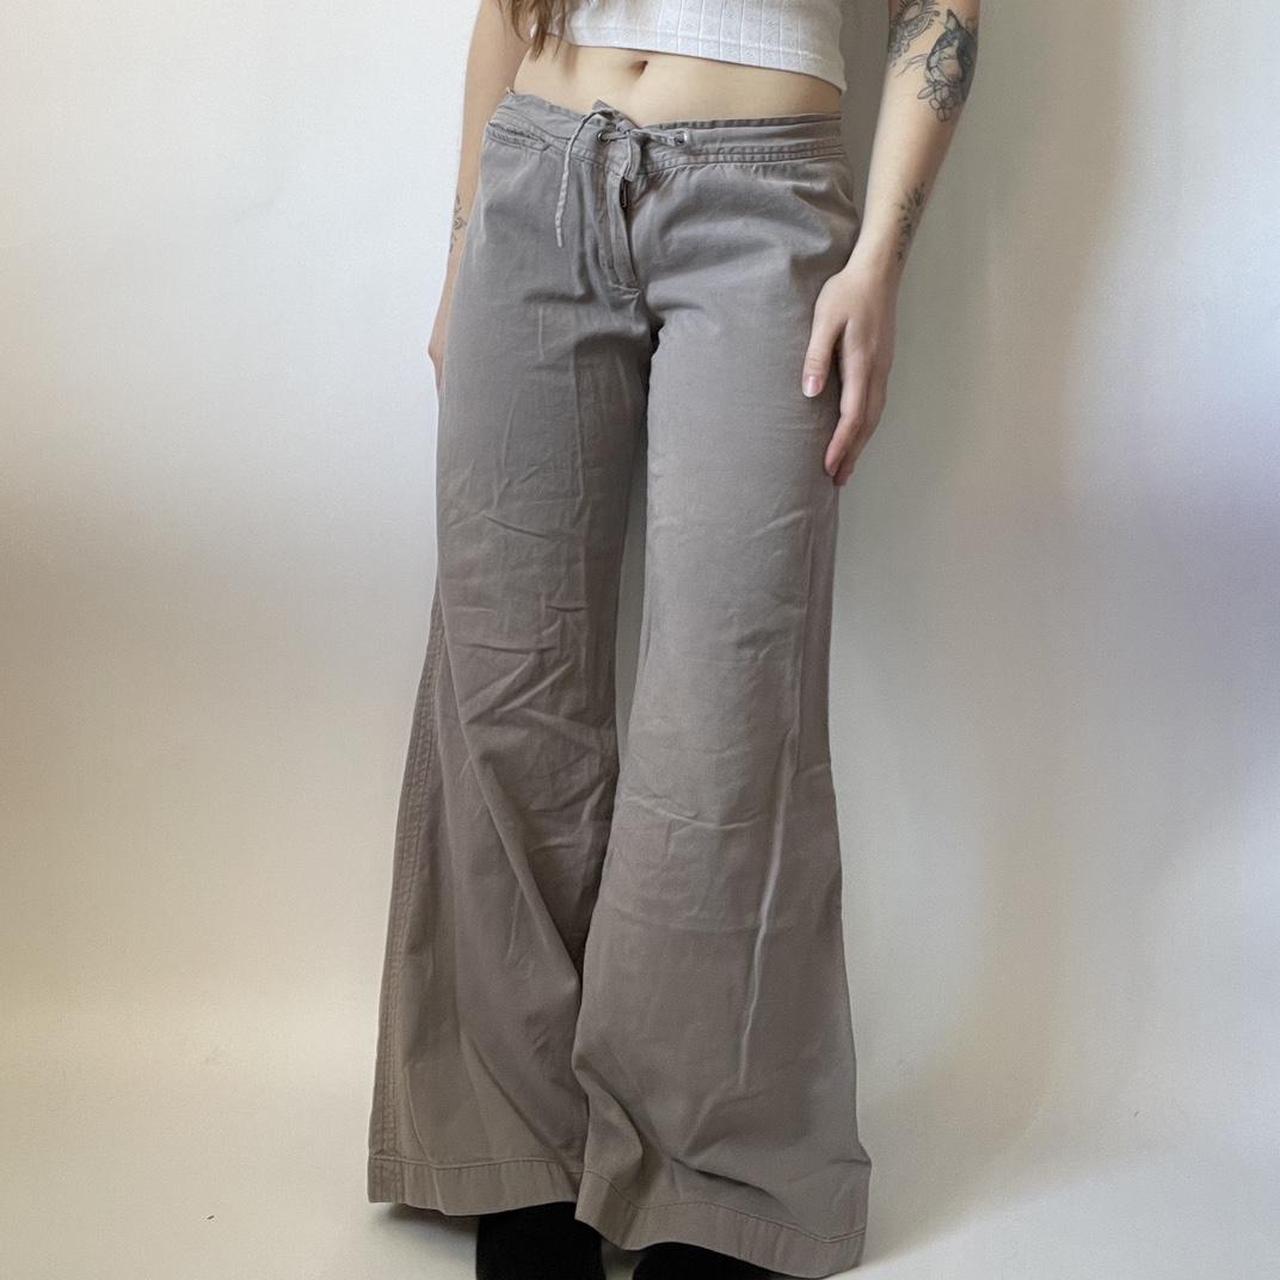 Beige trousers, low rise flared work pants - perfect - Depop